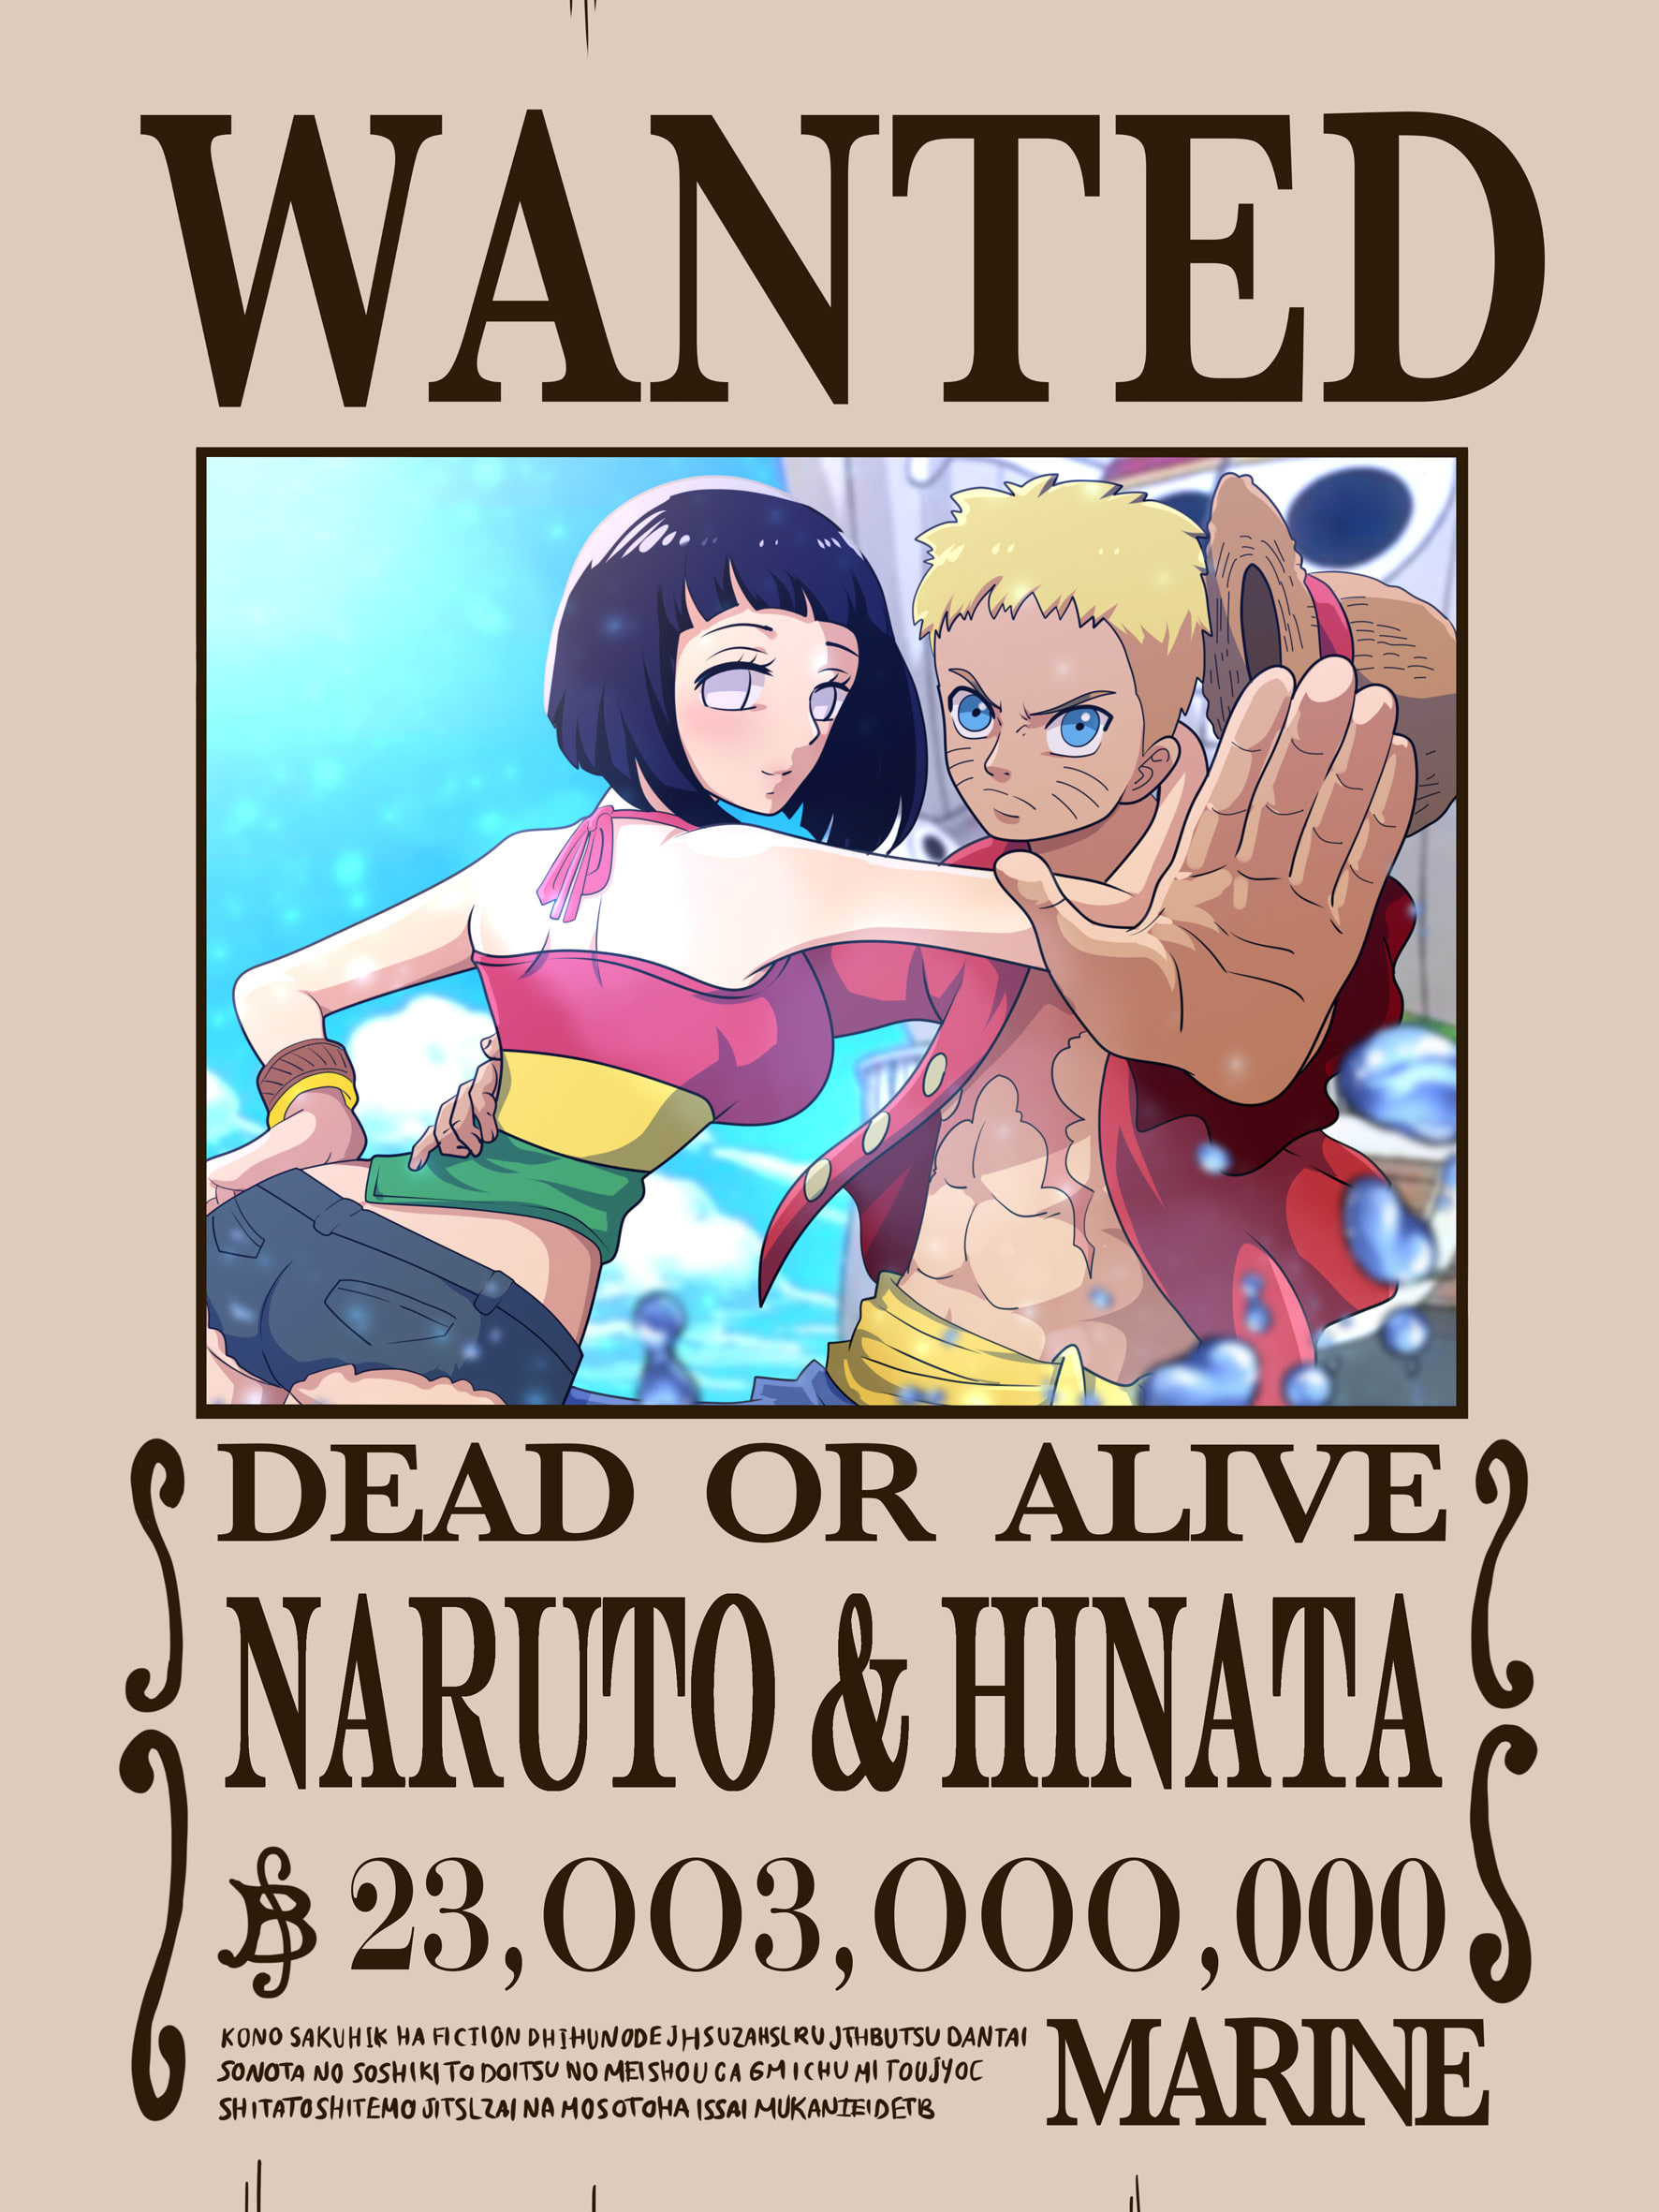 Buy naruto wanted poster online